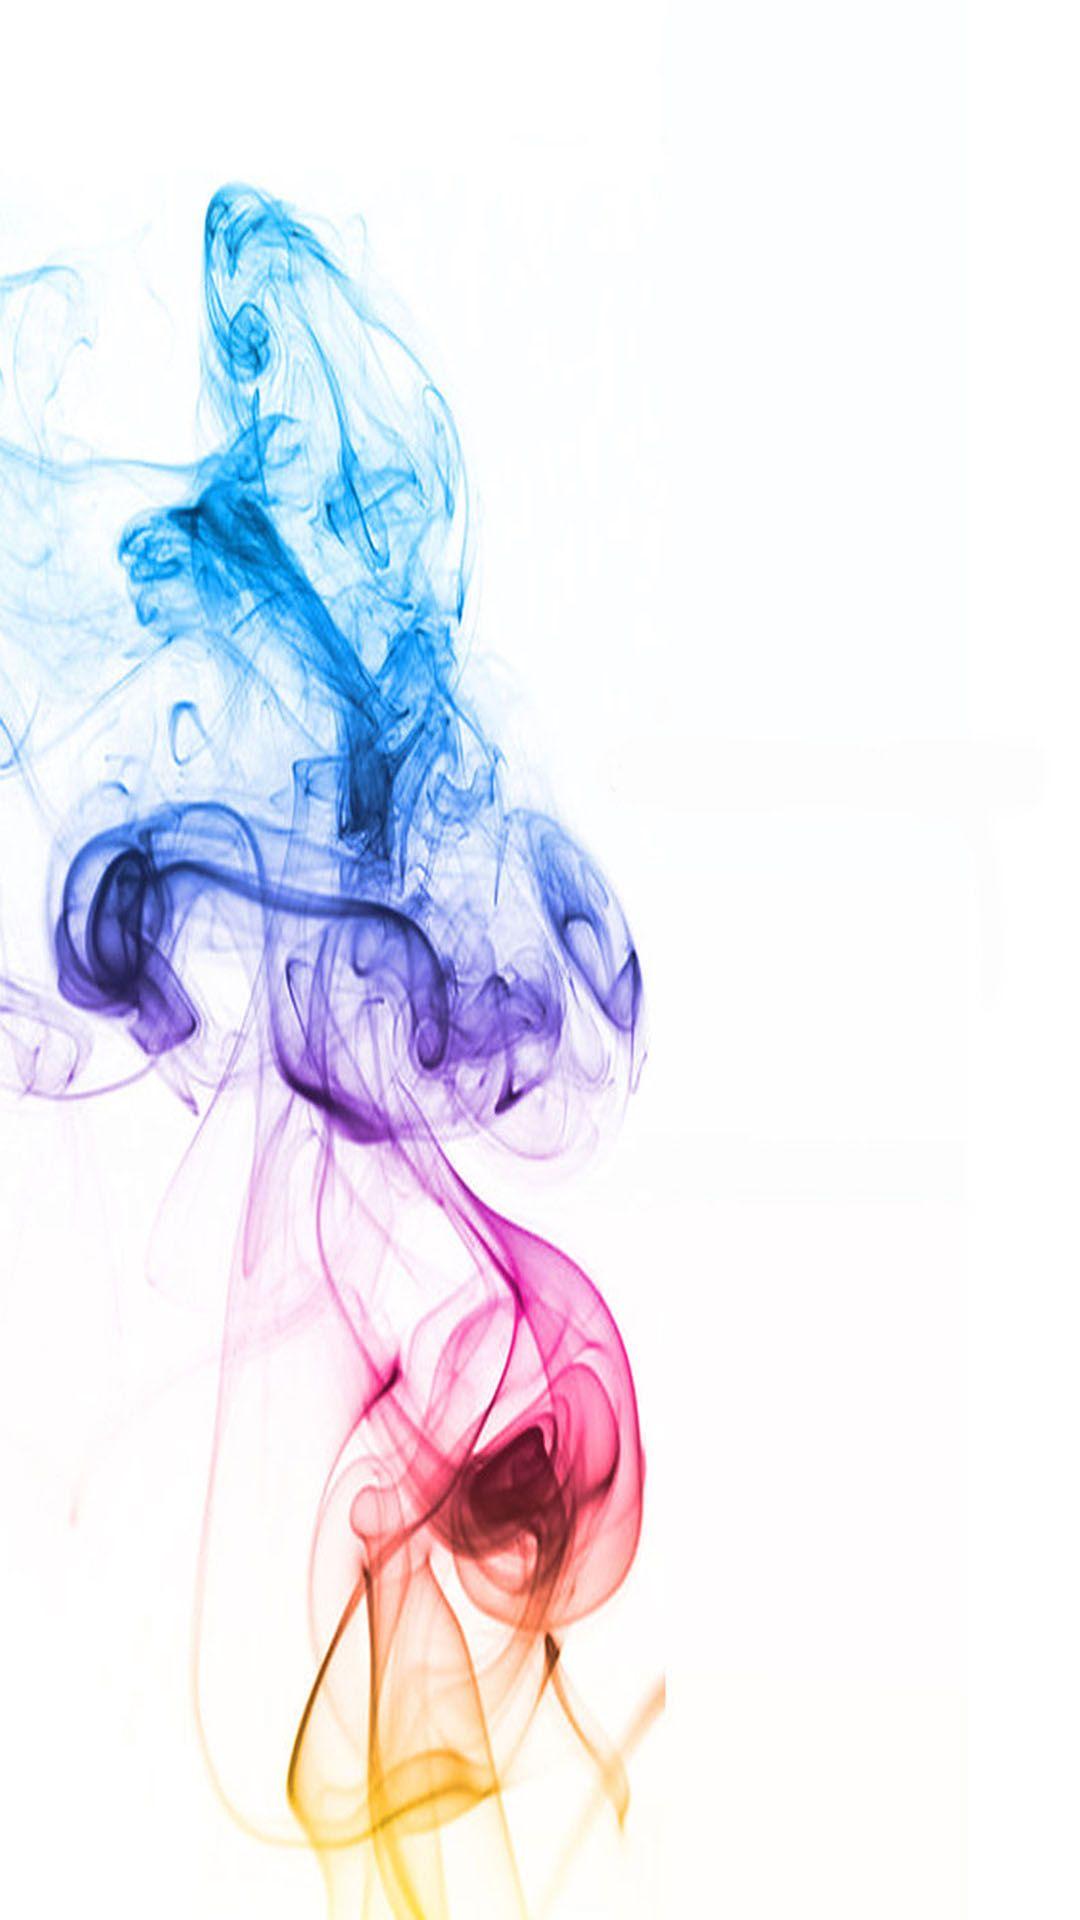 Color Smoke Mobile Phone Wallpaper Images Free Download on Lovepik   400837268